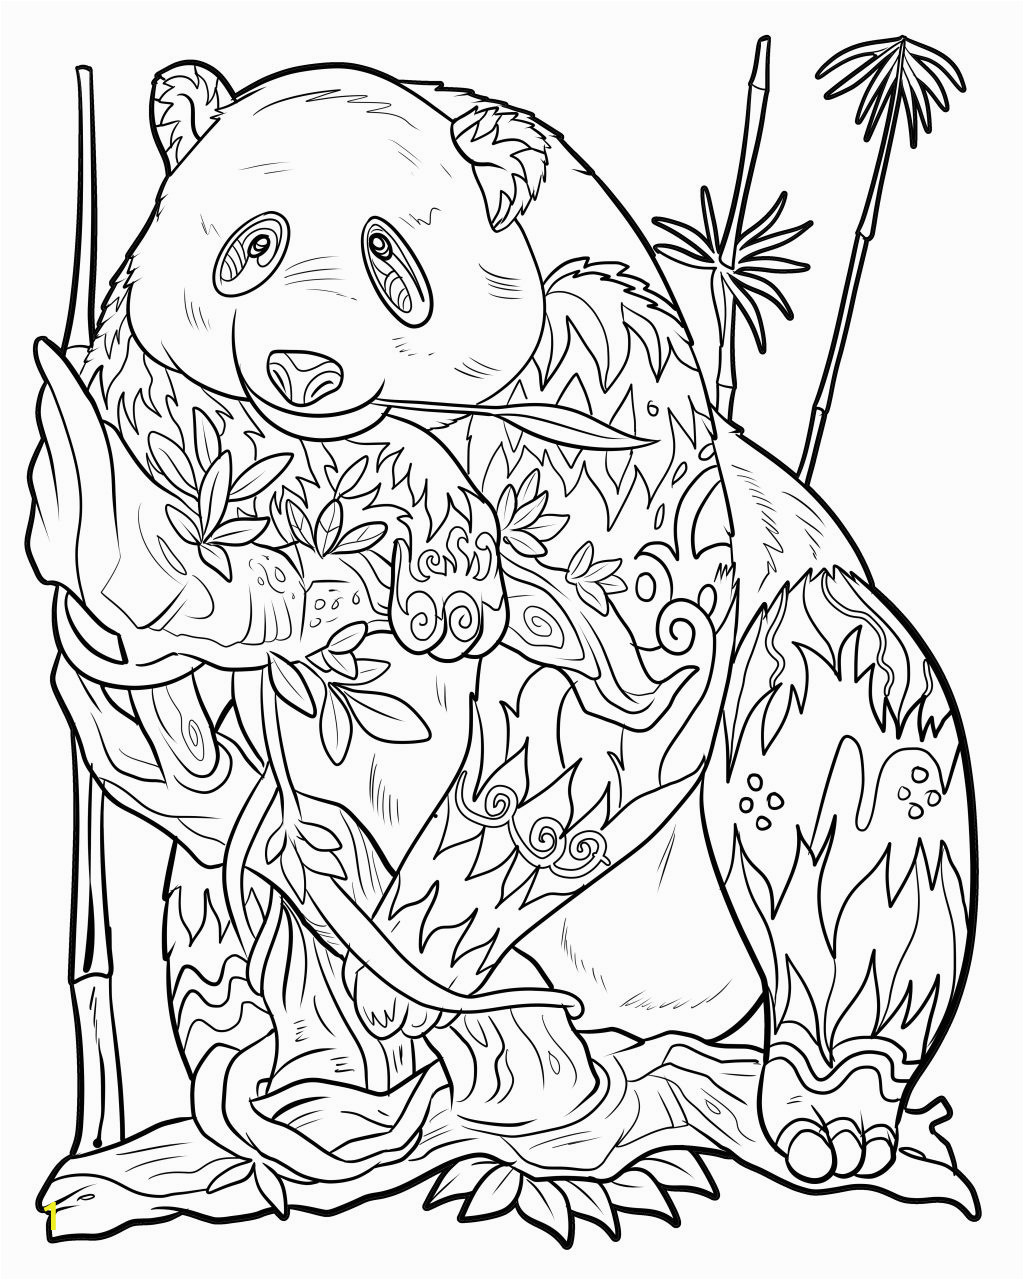 black history coloring book taco page childrens day colouring pages adult butterfly cute kawaii cat rex for preschoolers pterodactyl cuss word kid with purple crayon princess frozen 1024x1280